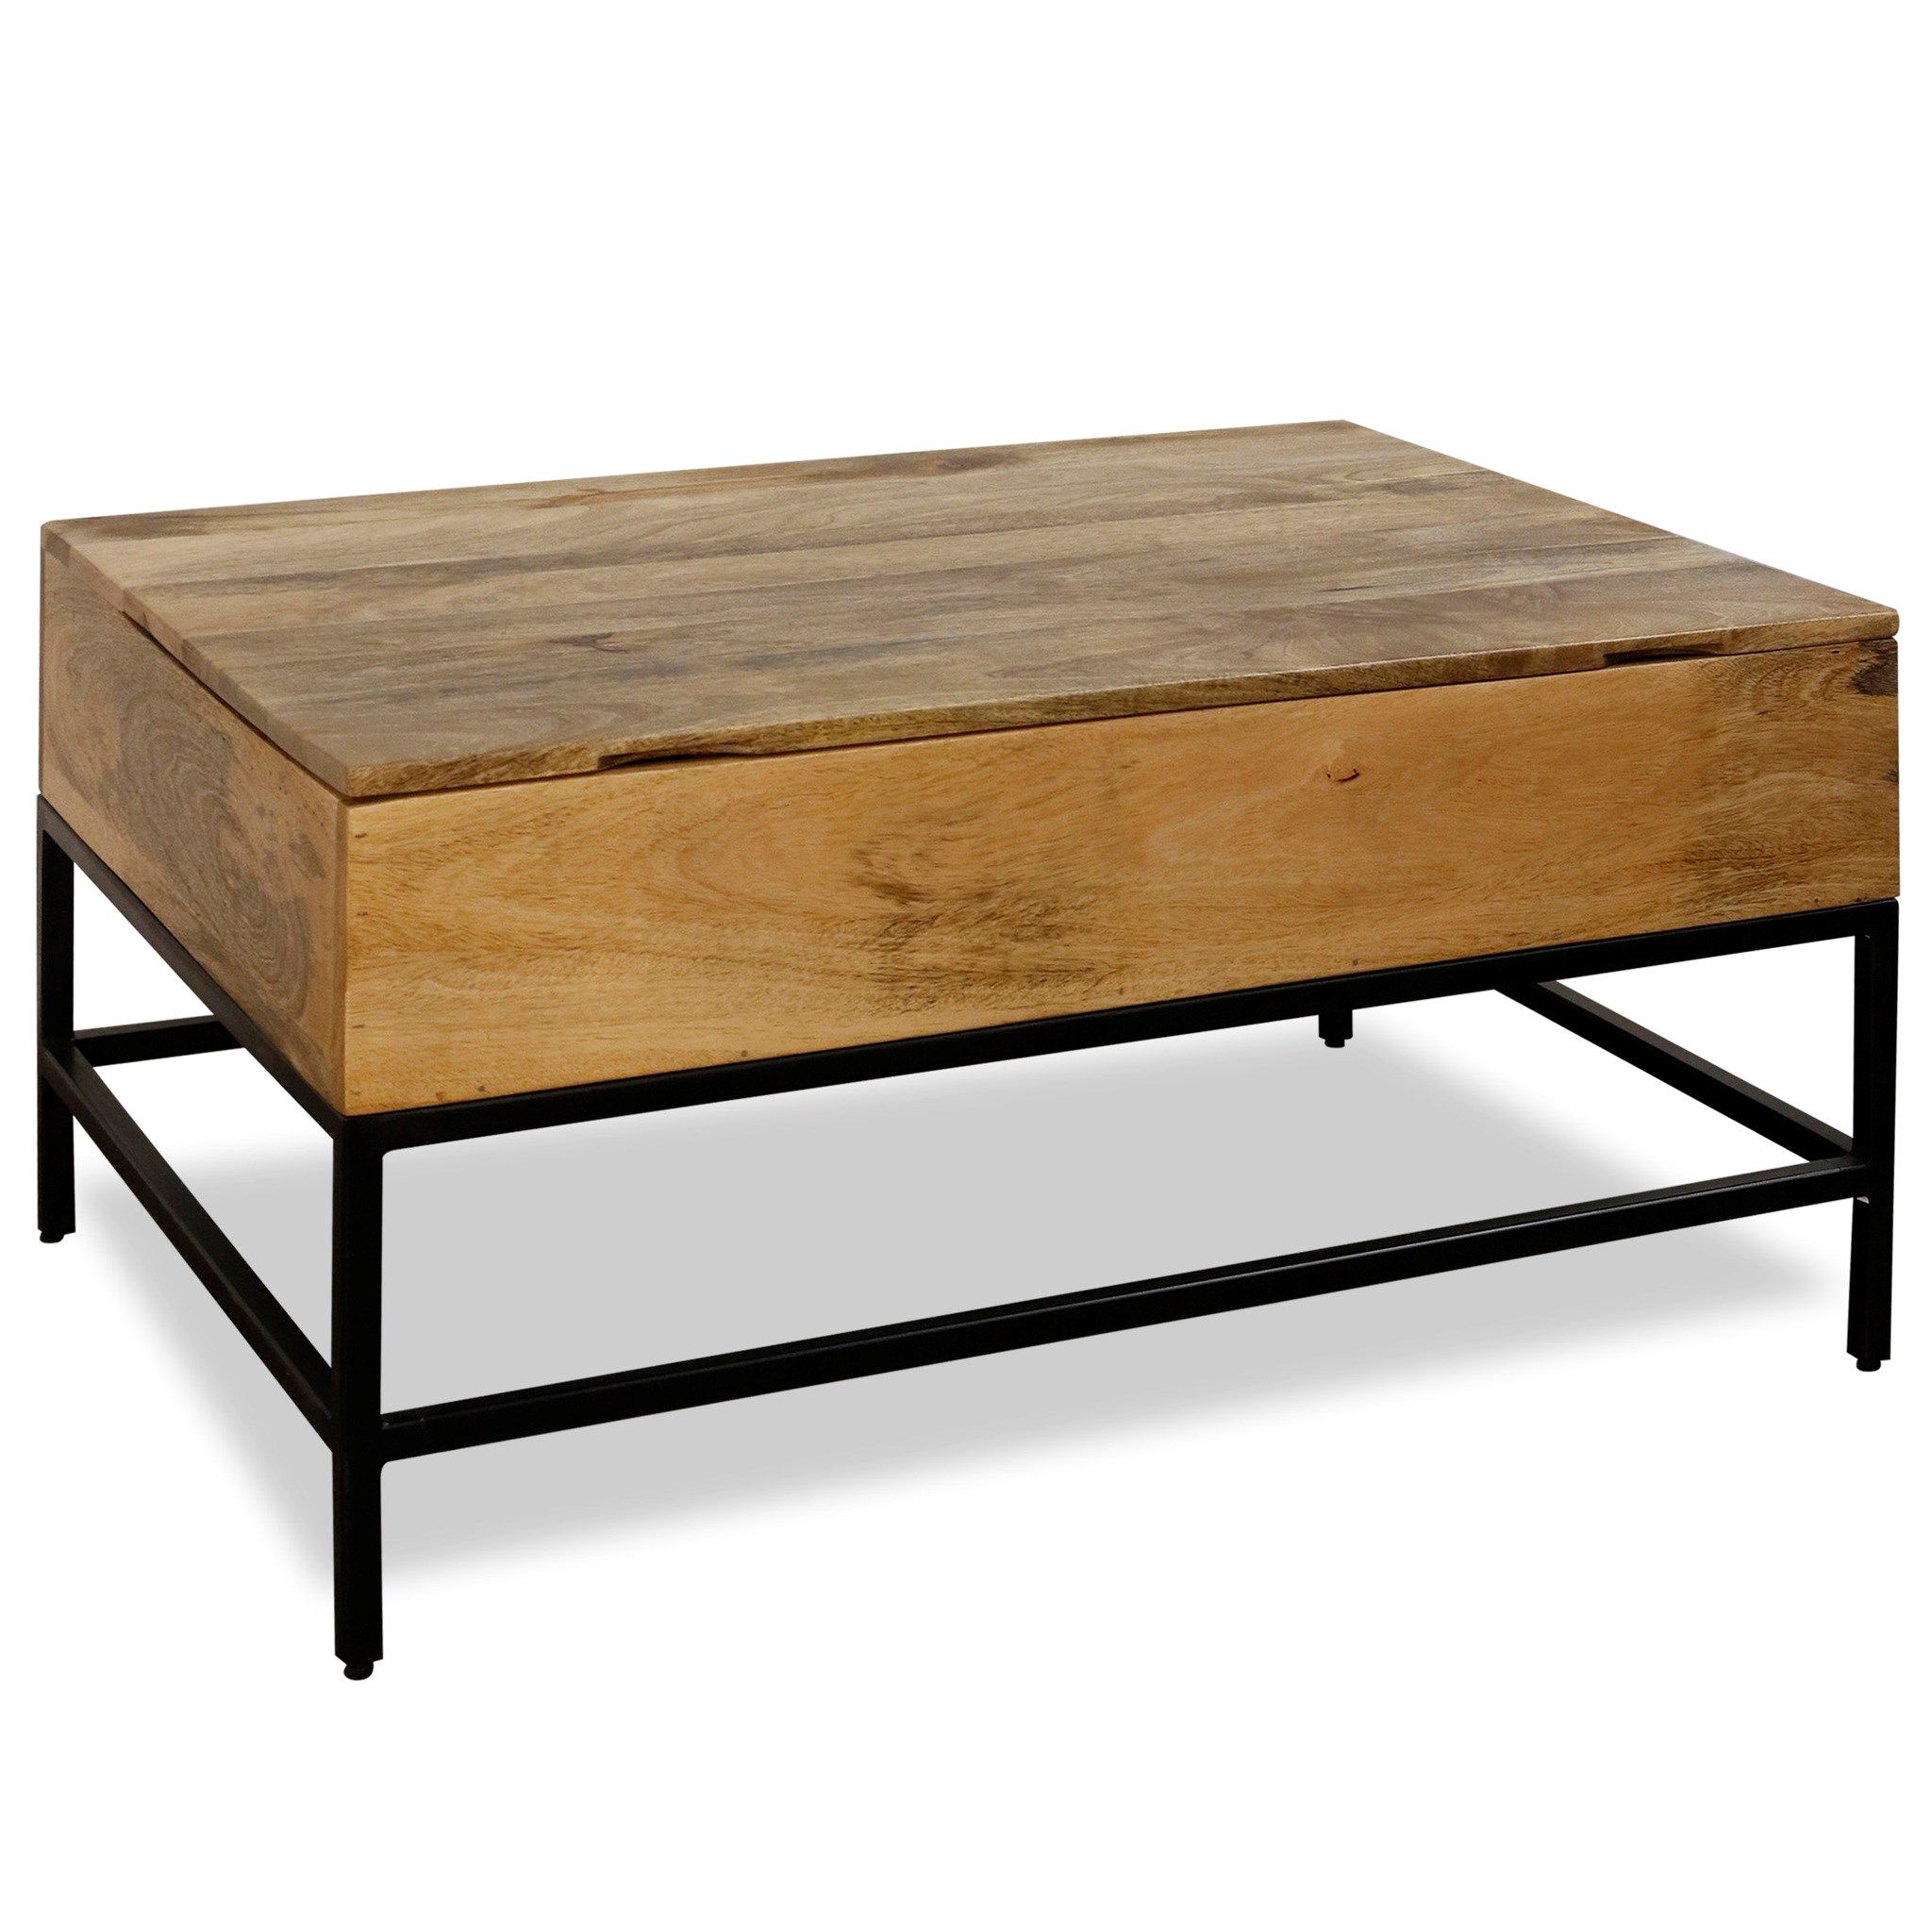 Solid Mango Wood Split Lift Top Storage Coffee Table In A Light Natural  Stainstylecraft – Broadway Furniture For Natural Stained Wood Coffee Tables (View 10 of 15)